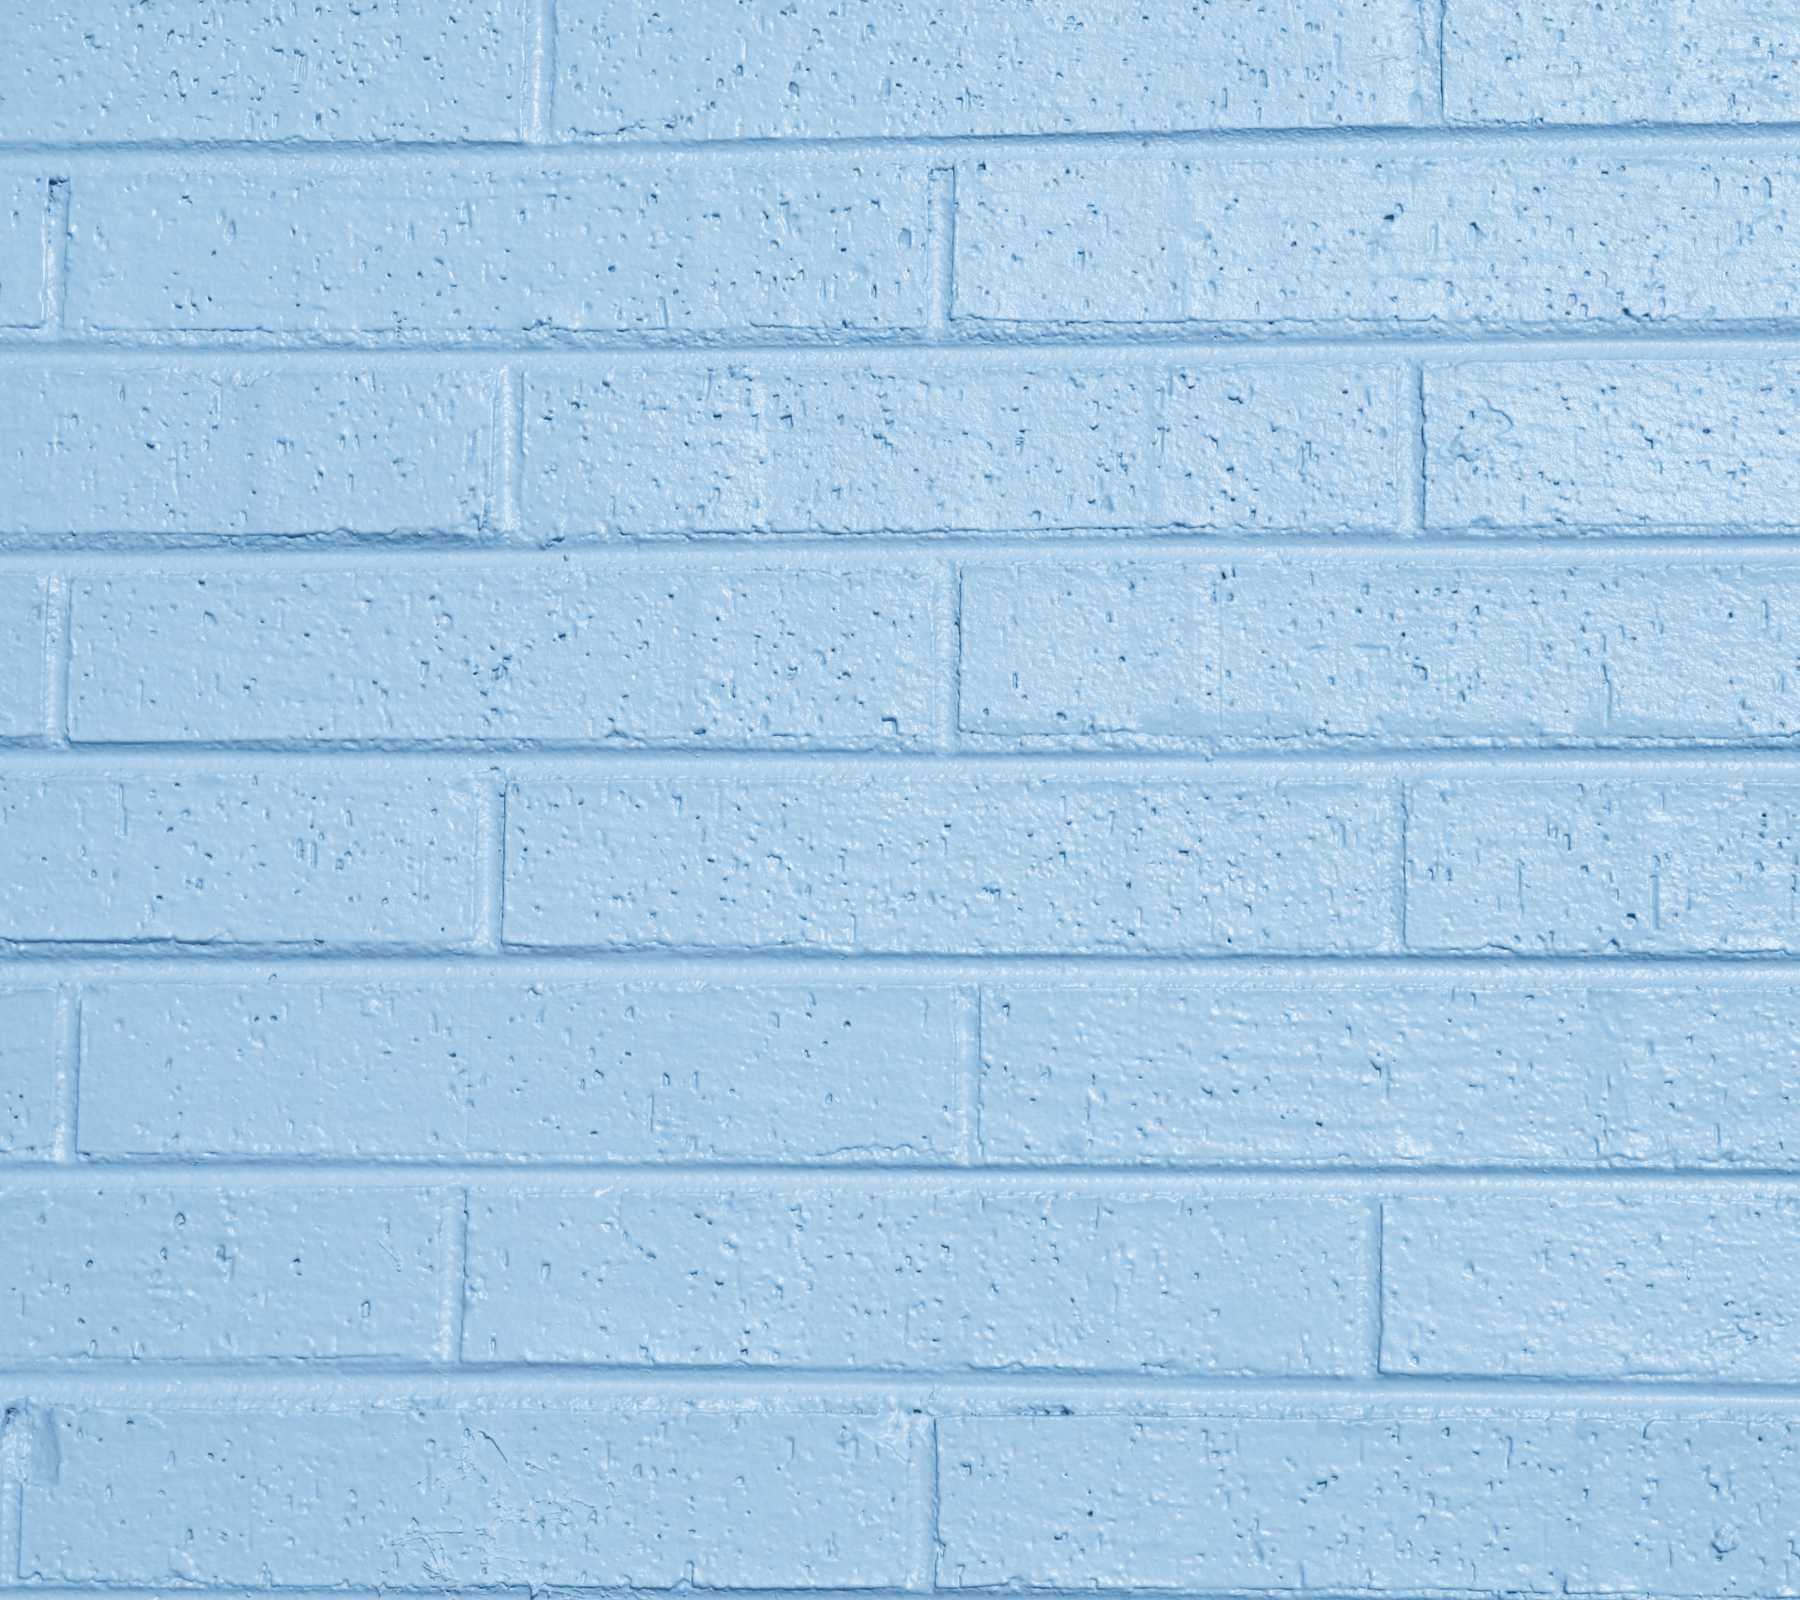 Baby Blue Painted Brick Wall Background Image, Wallpaper or